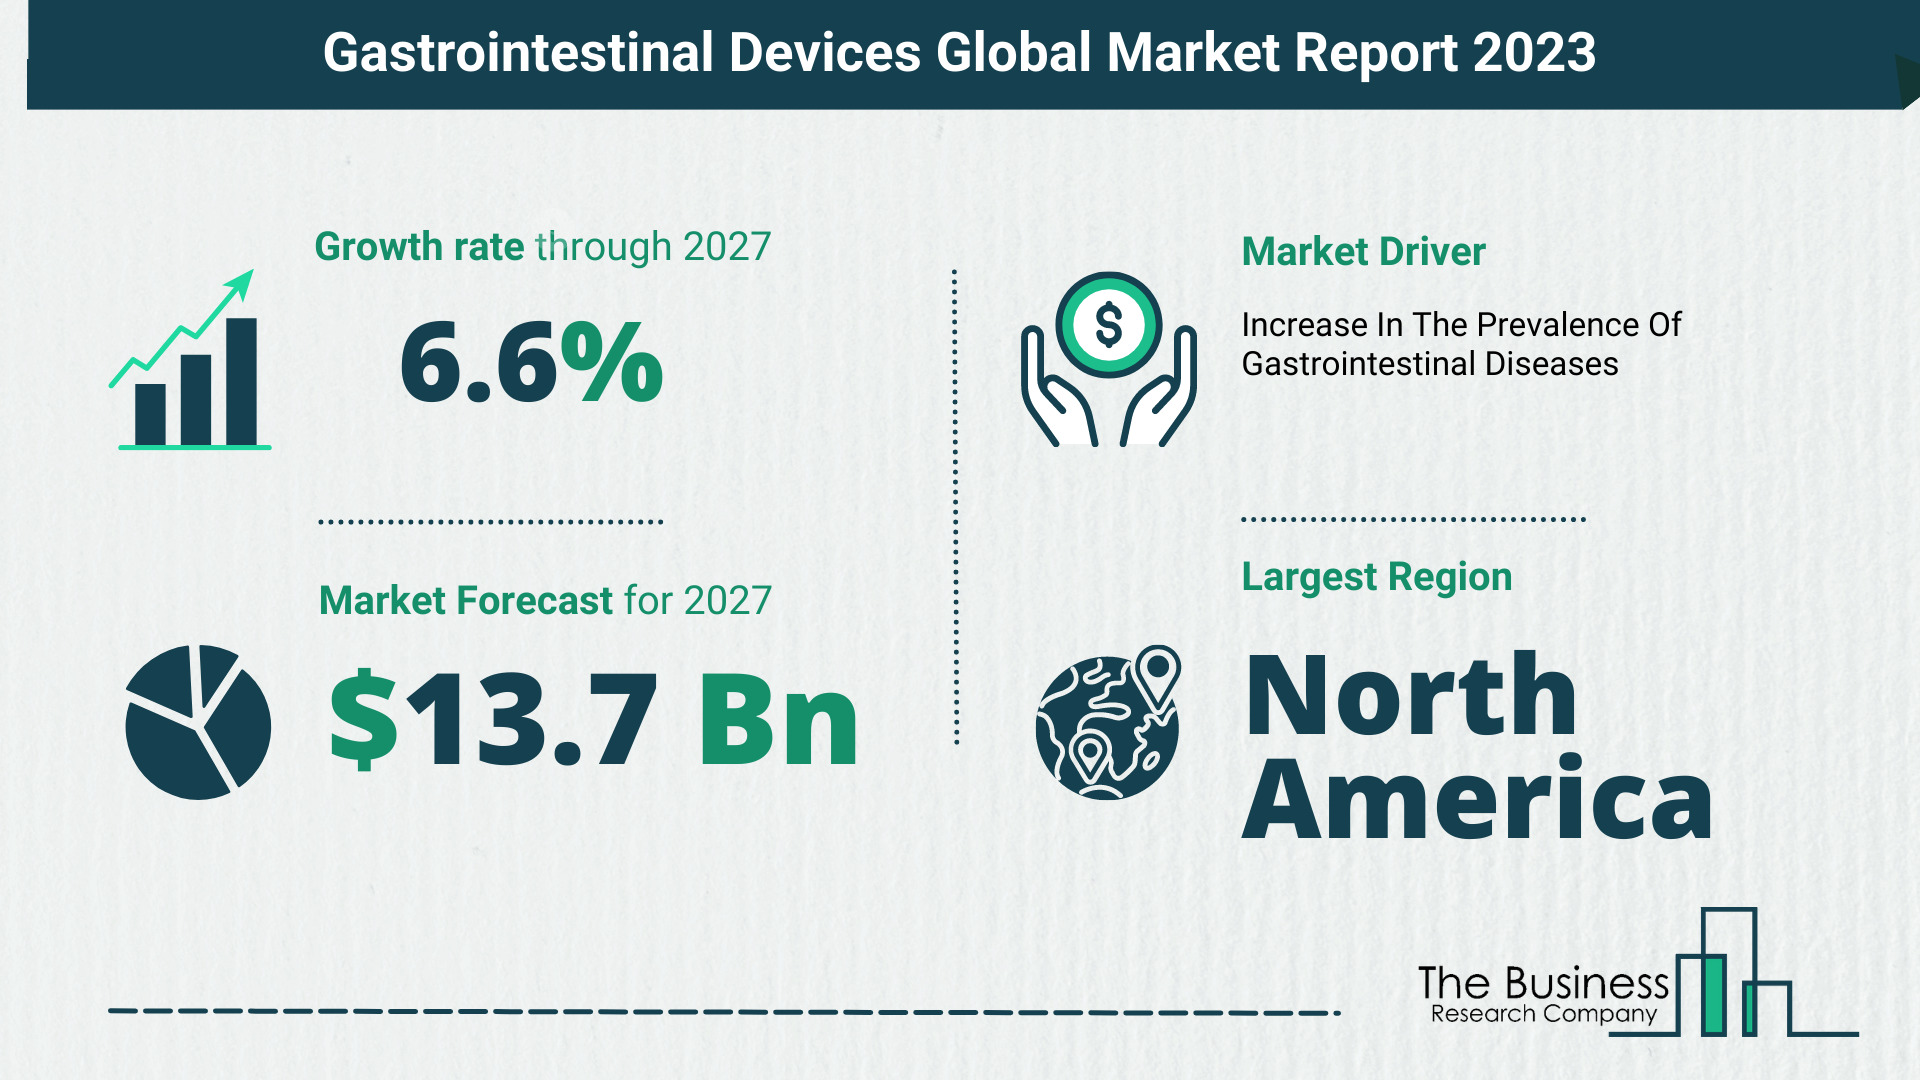 What Will The Gastrointestinal Devices Market Look Like In 2023?